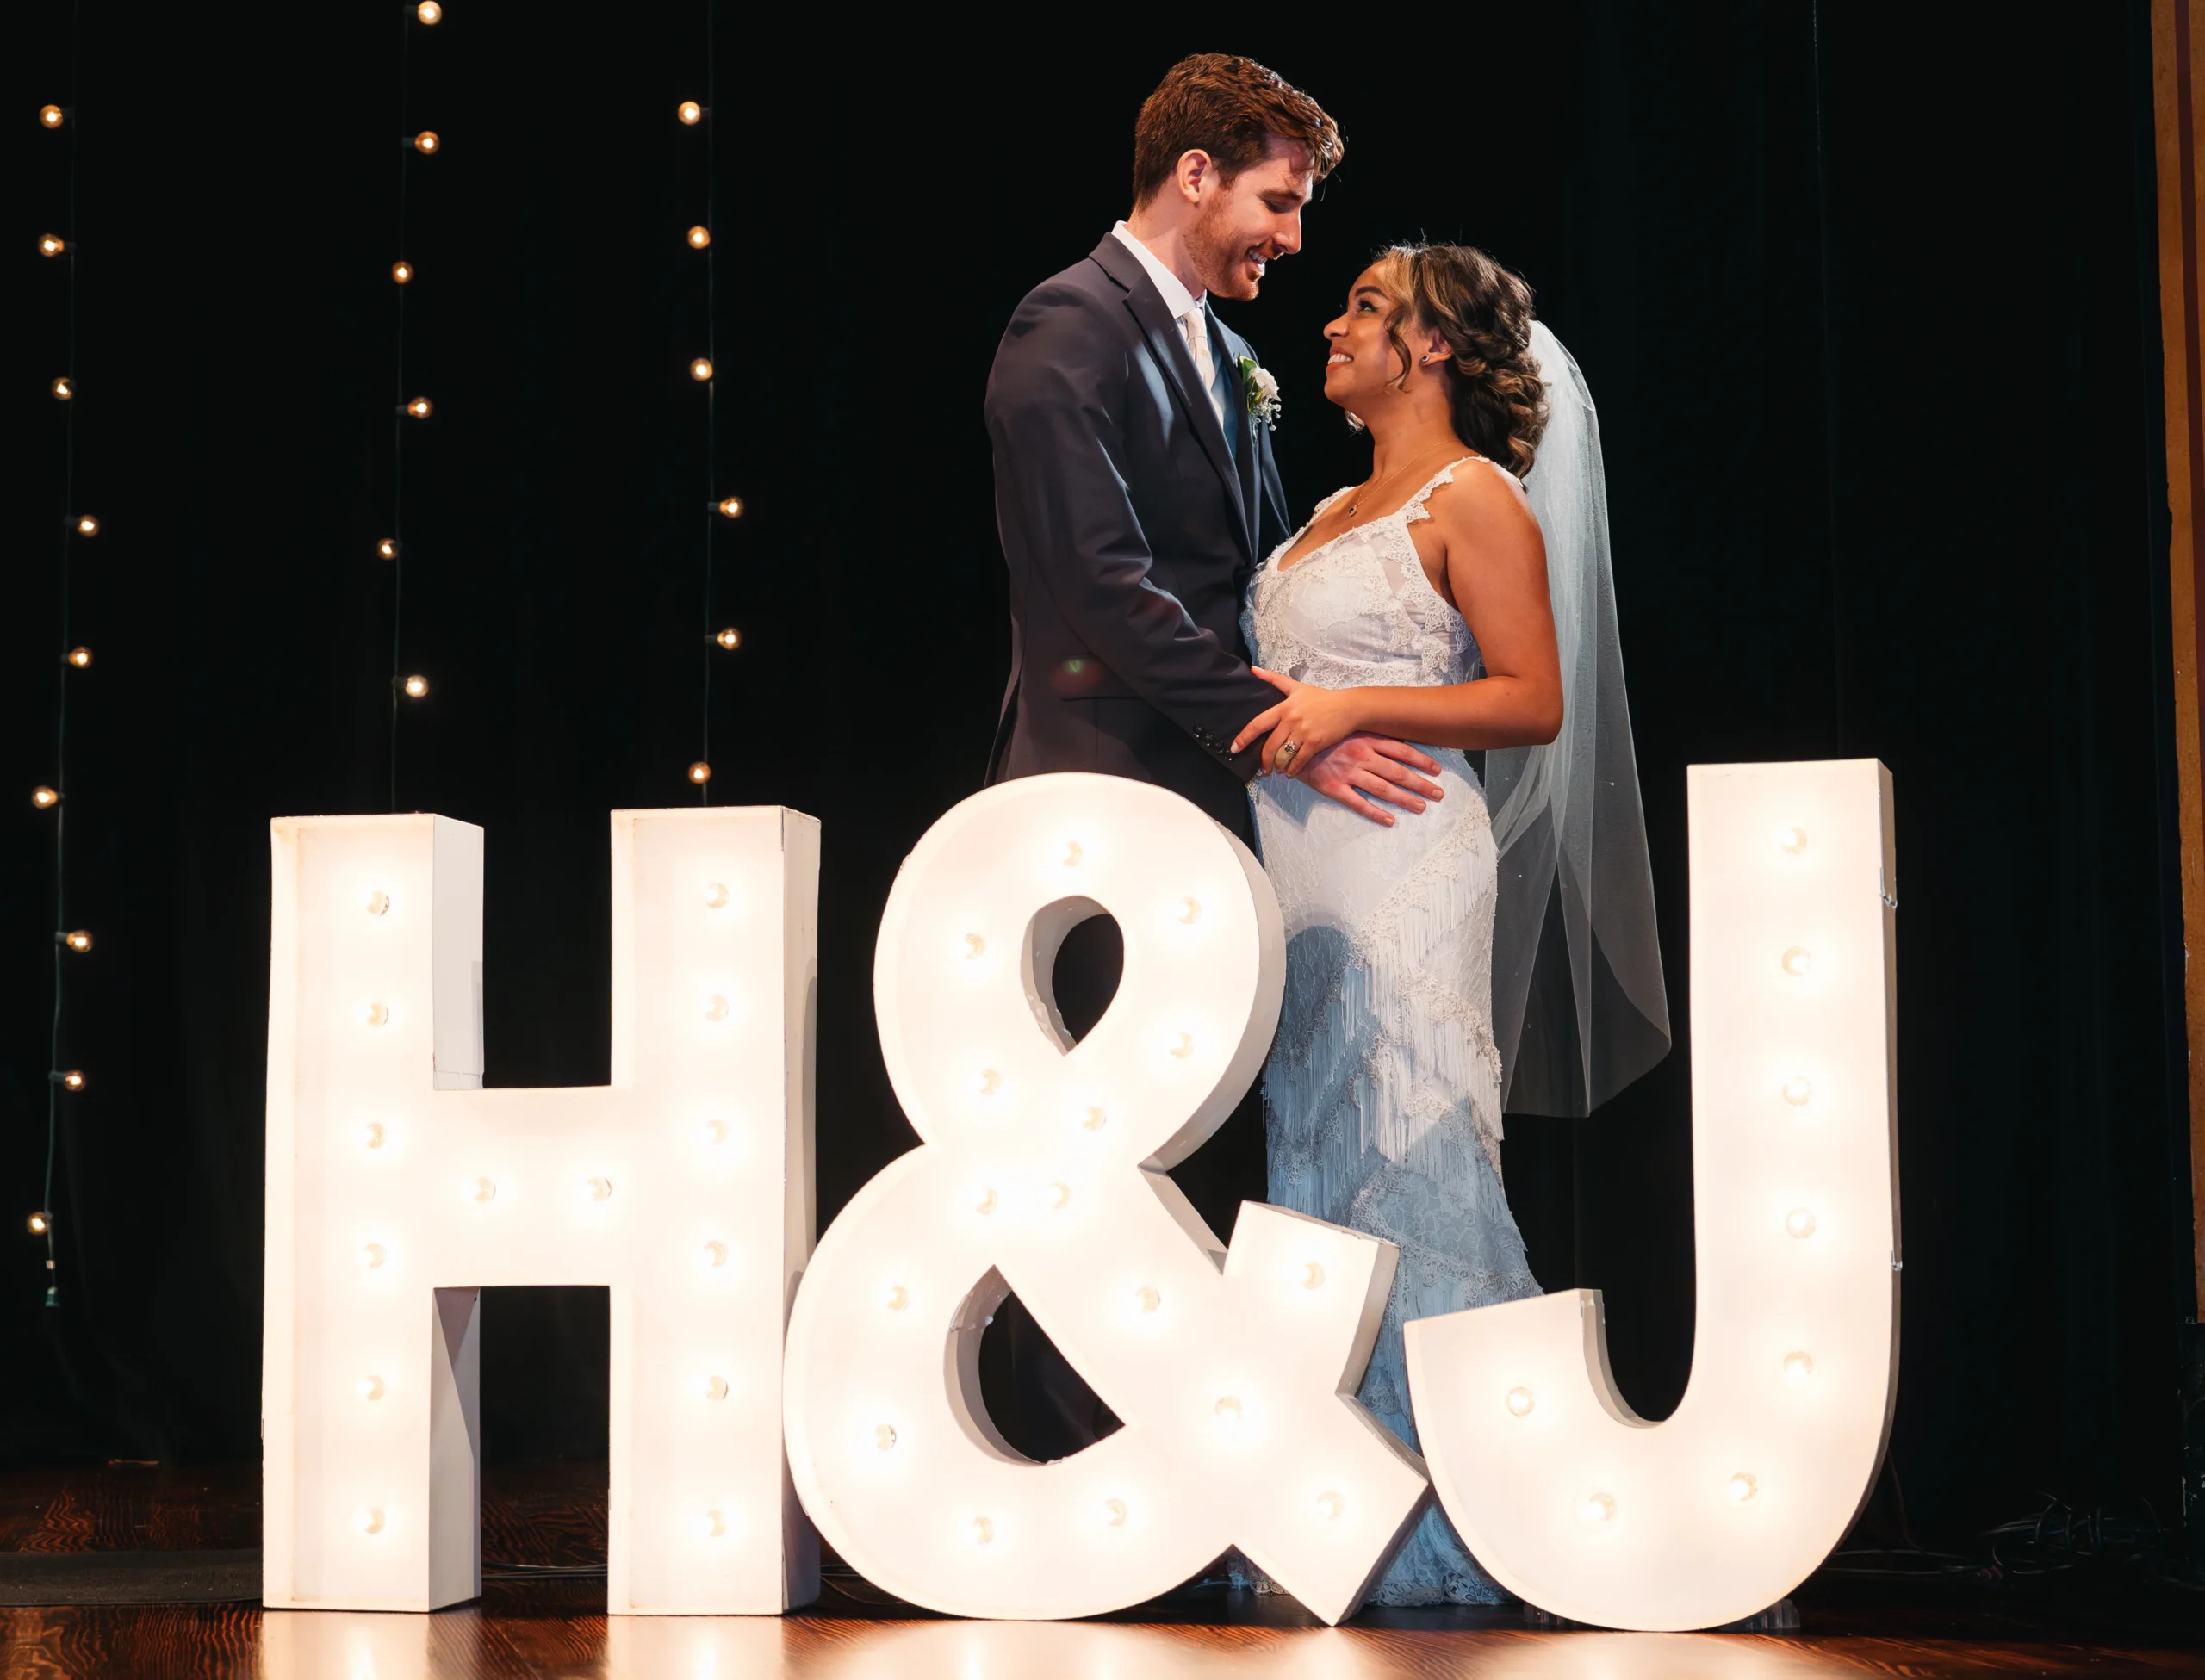 Bride and groom standing behind giant letters that read 'H&J'